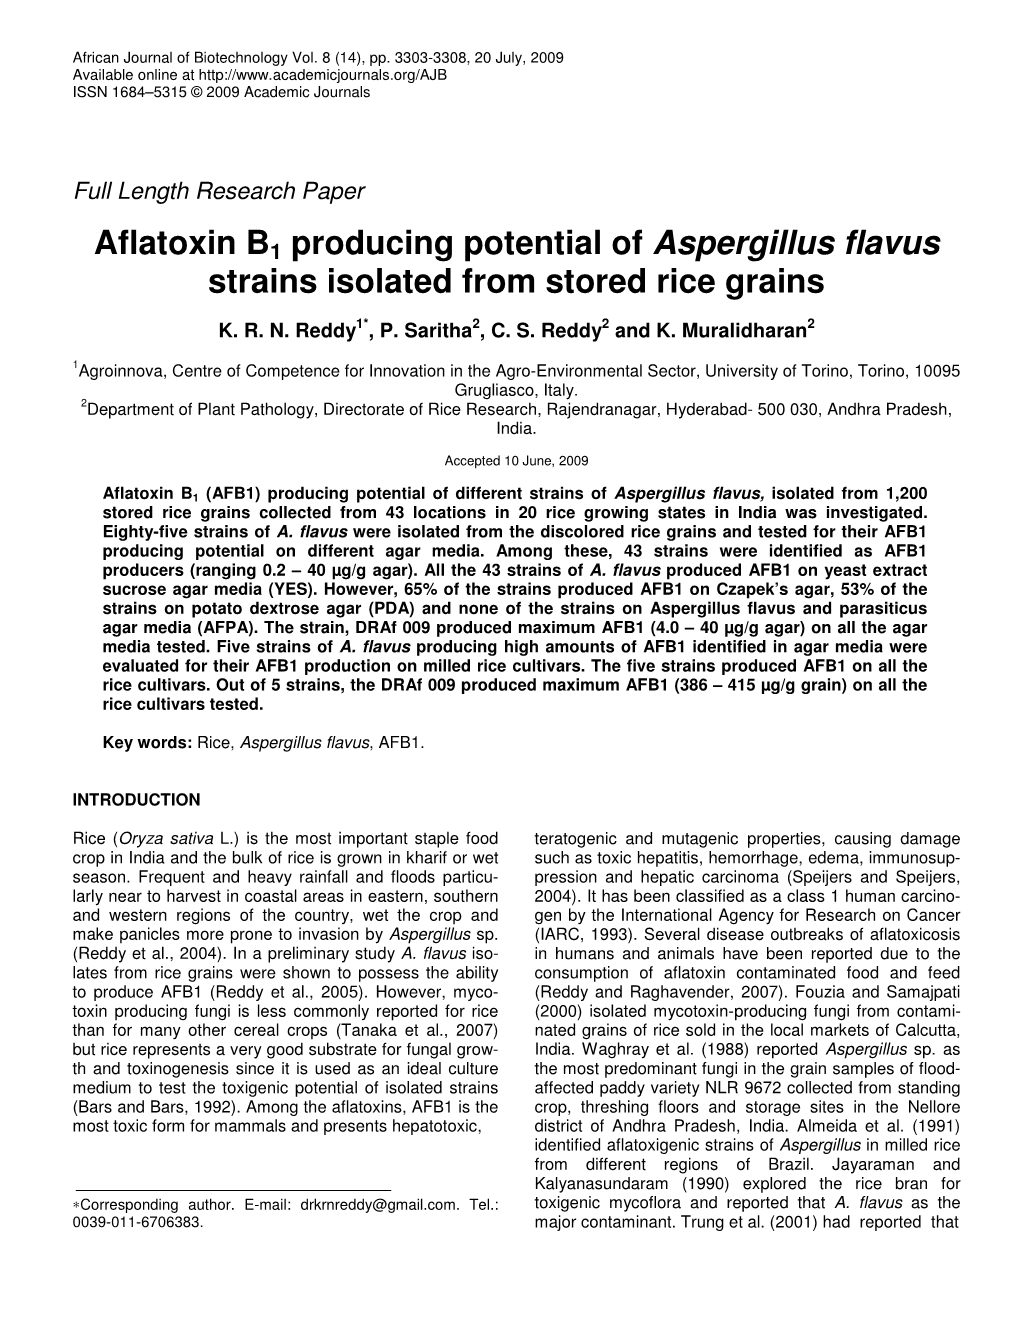 Aflatoxin B1 Producing Potential of Aspergillus Flavus Strains Isolated from Stored Rice Grains